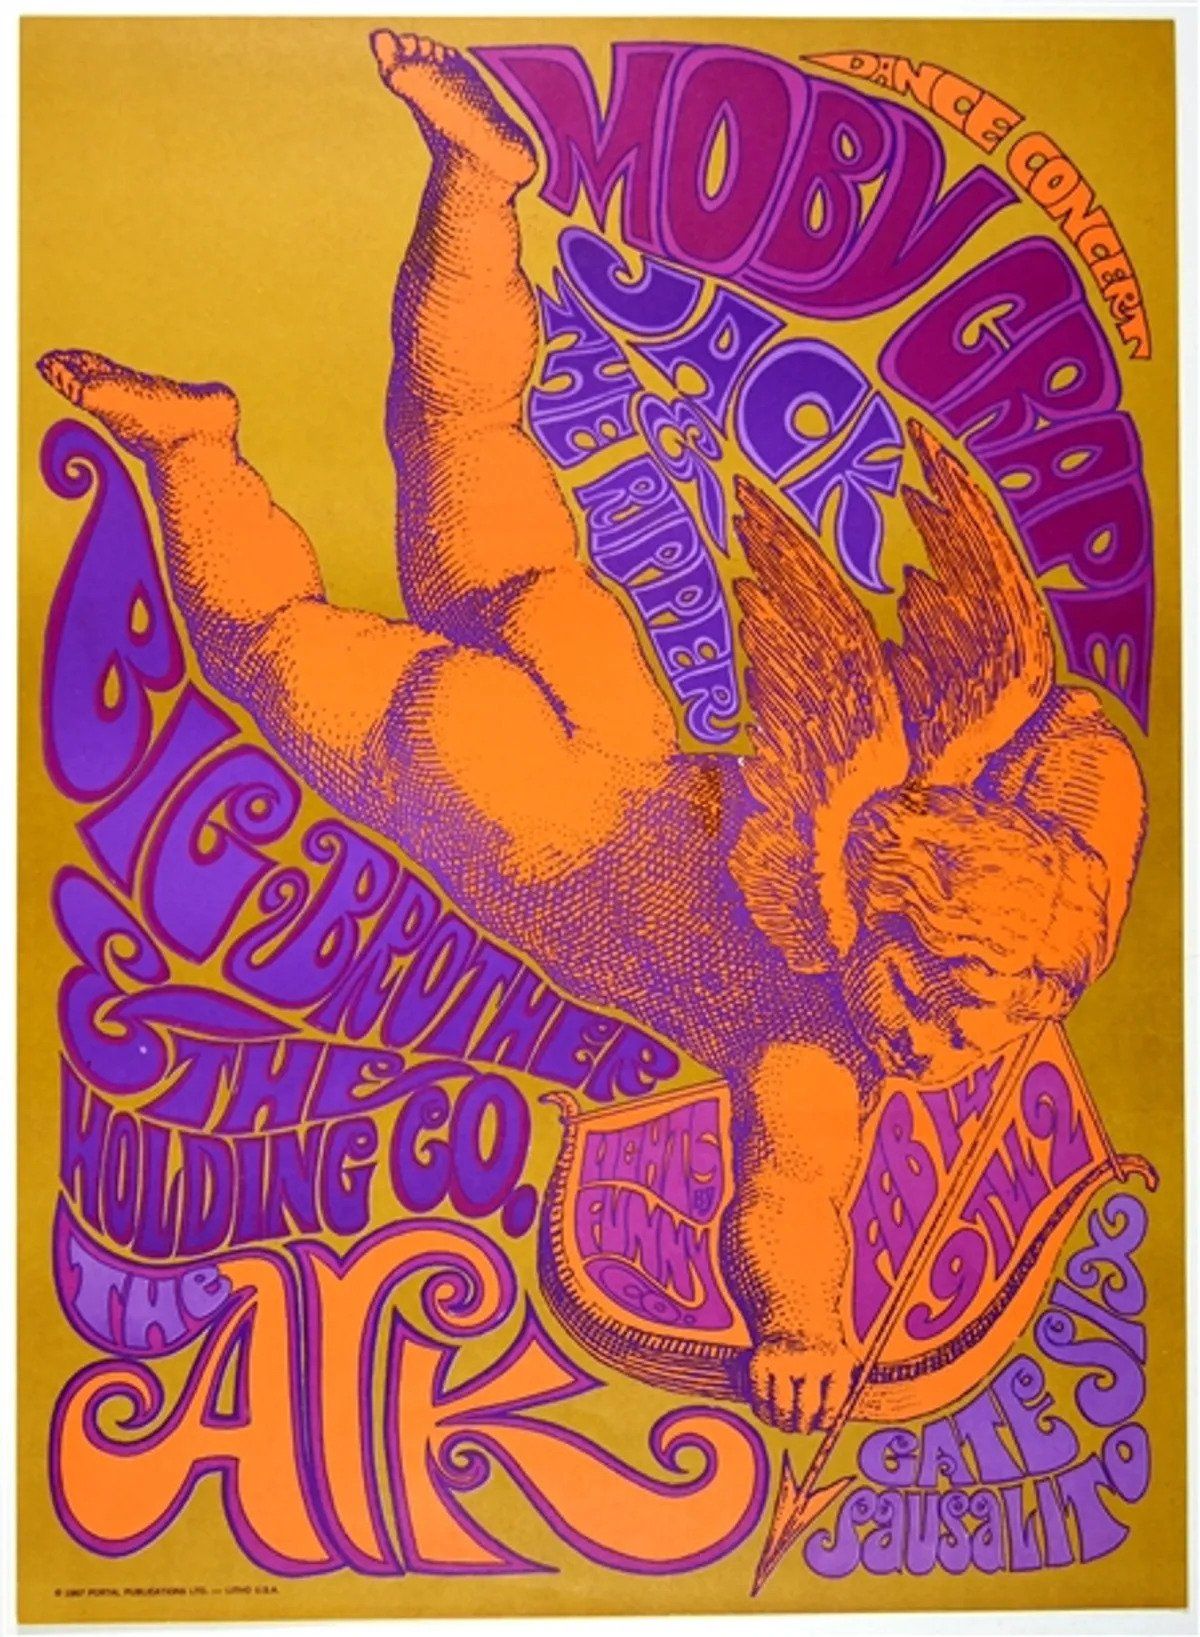 Big Brother & The Holding Company with Moby Grape The Ark 1967 Concert Poster